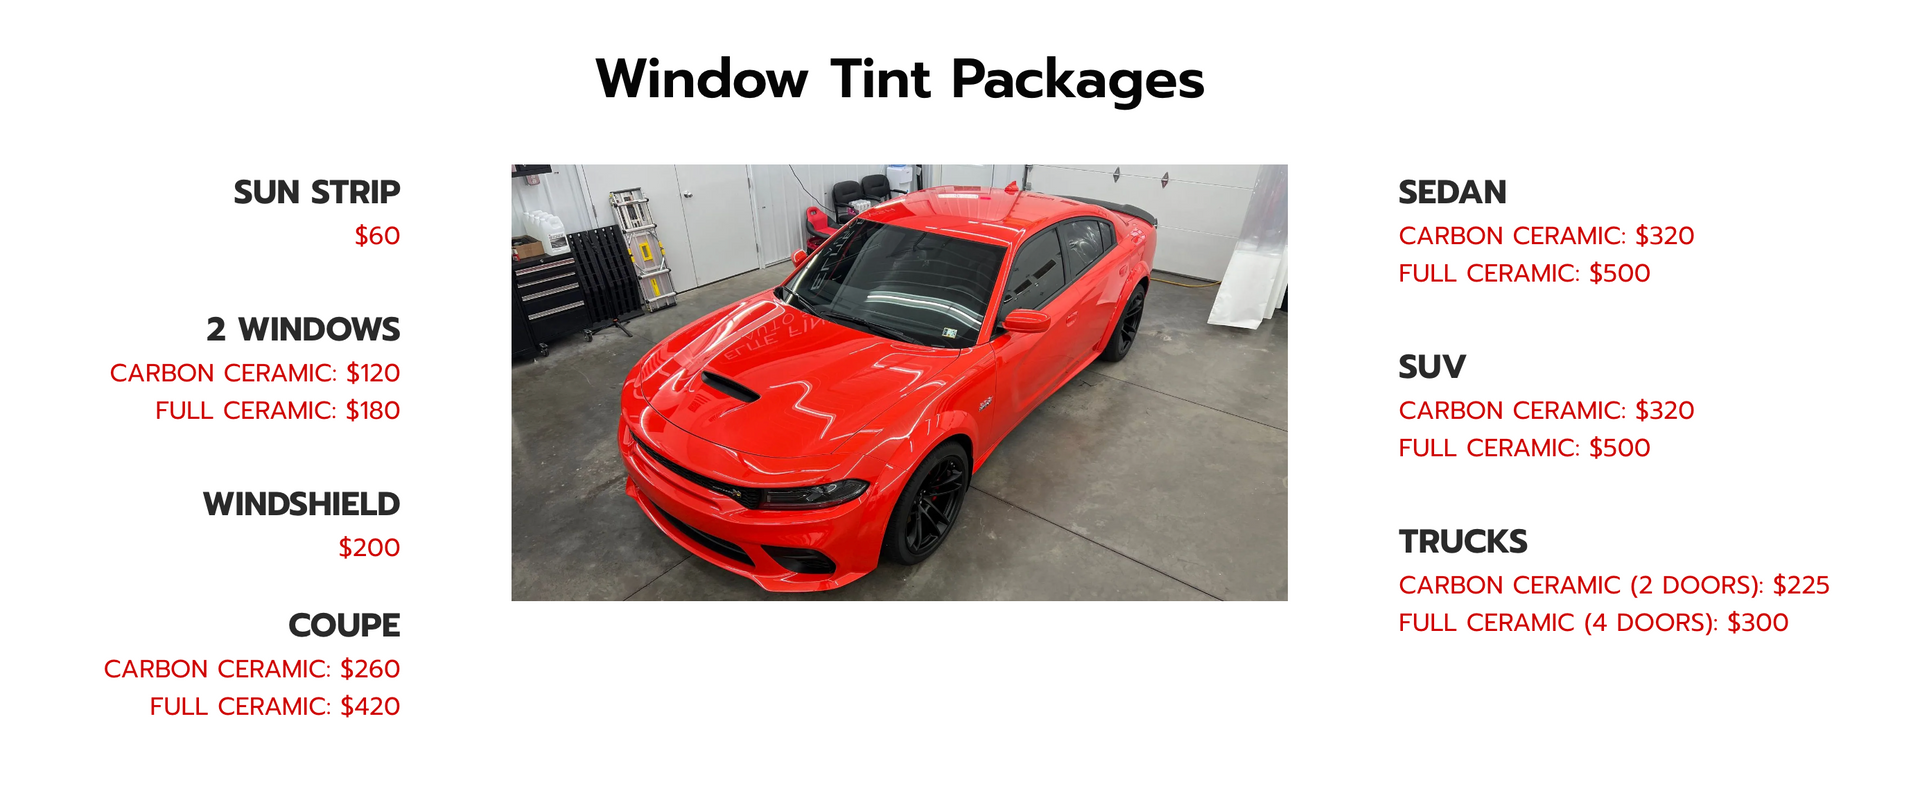 window-tint-york-packages-elite-finish-auto-spa